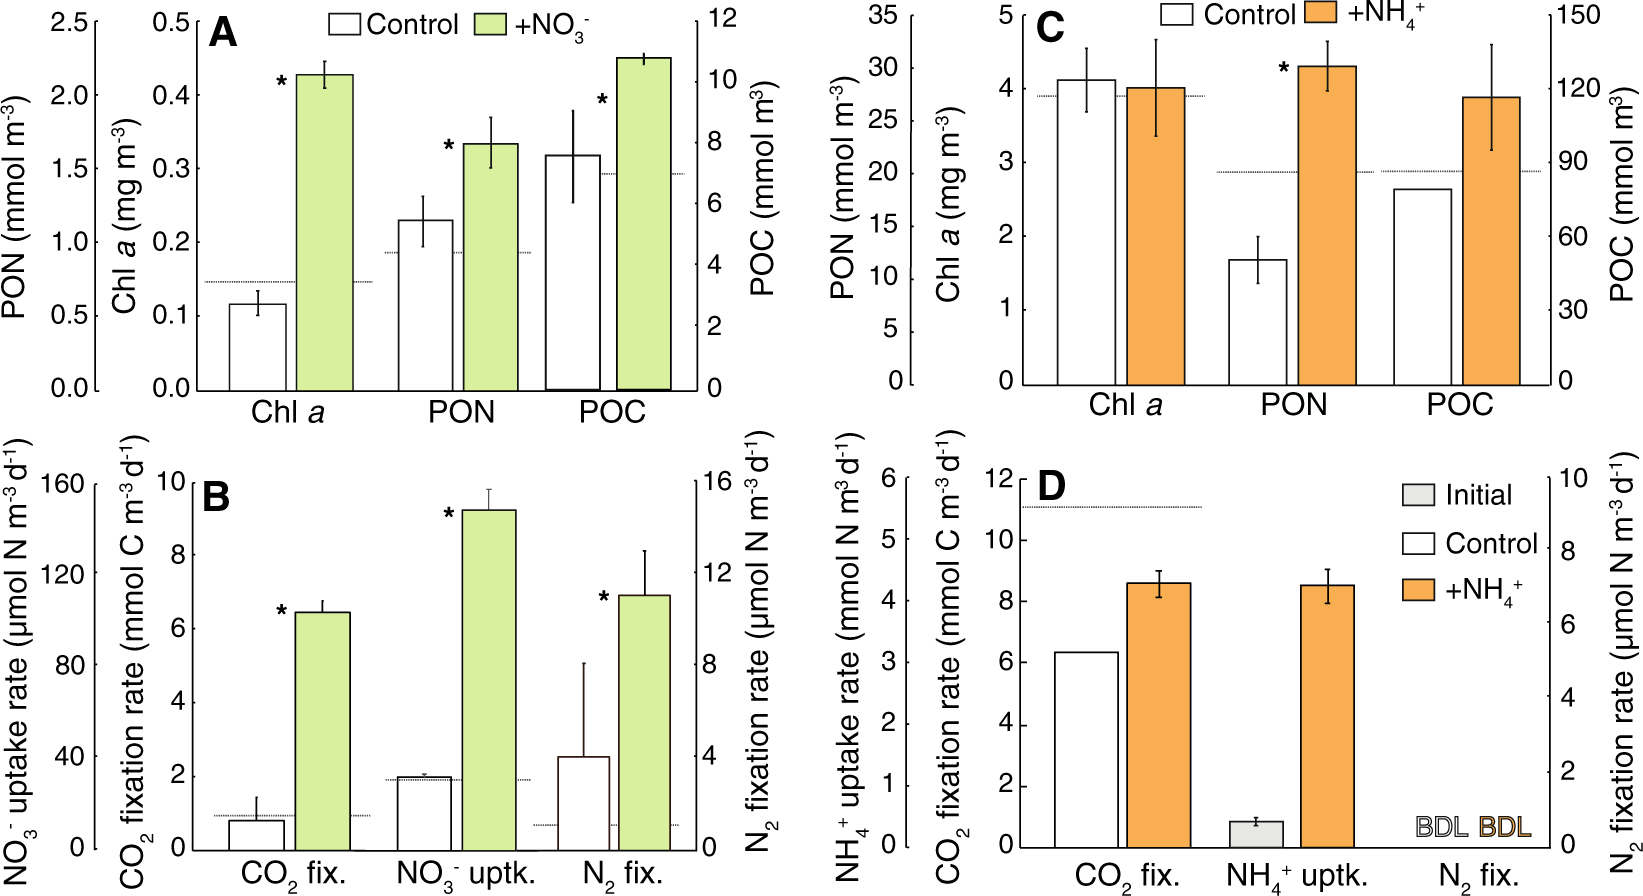 Unusual marine cyanobacteria/haptophyte symbiosis relies on N2 fixation  even in N-rich environments | The ISME Journal